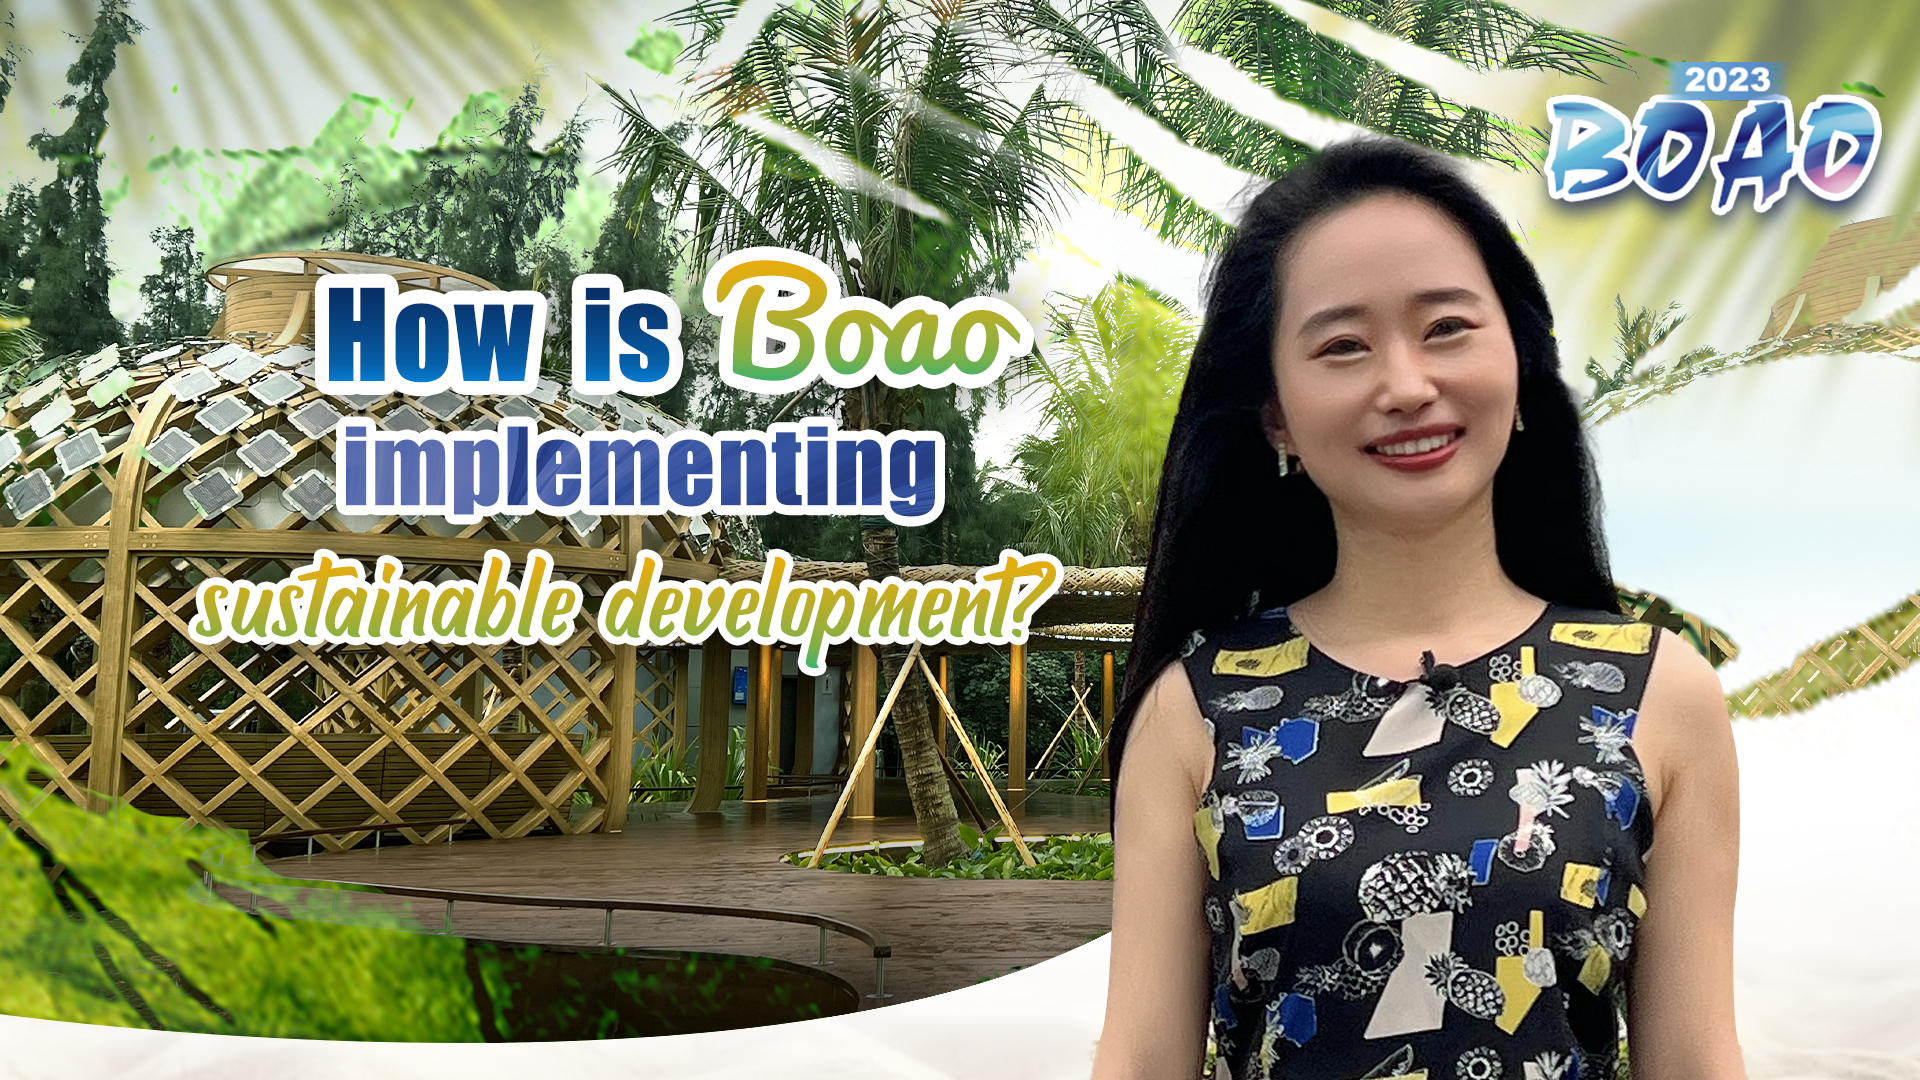 Live: Green development in action – How is Boao implementing sustainable development?